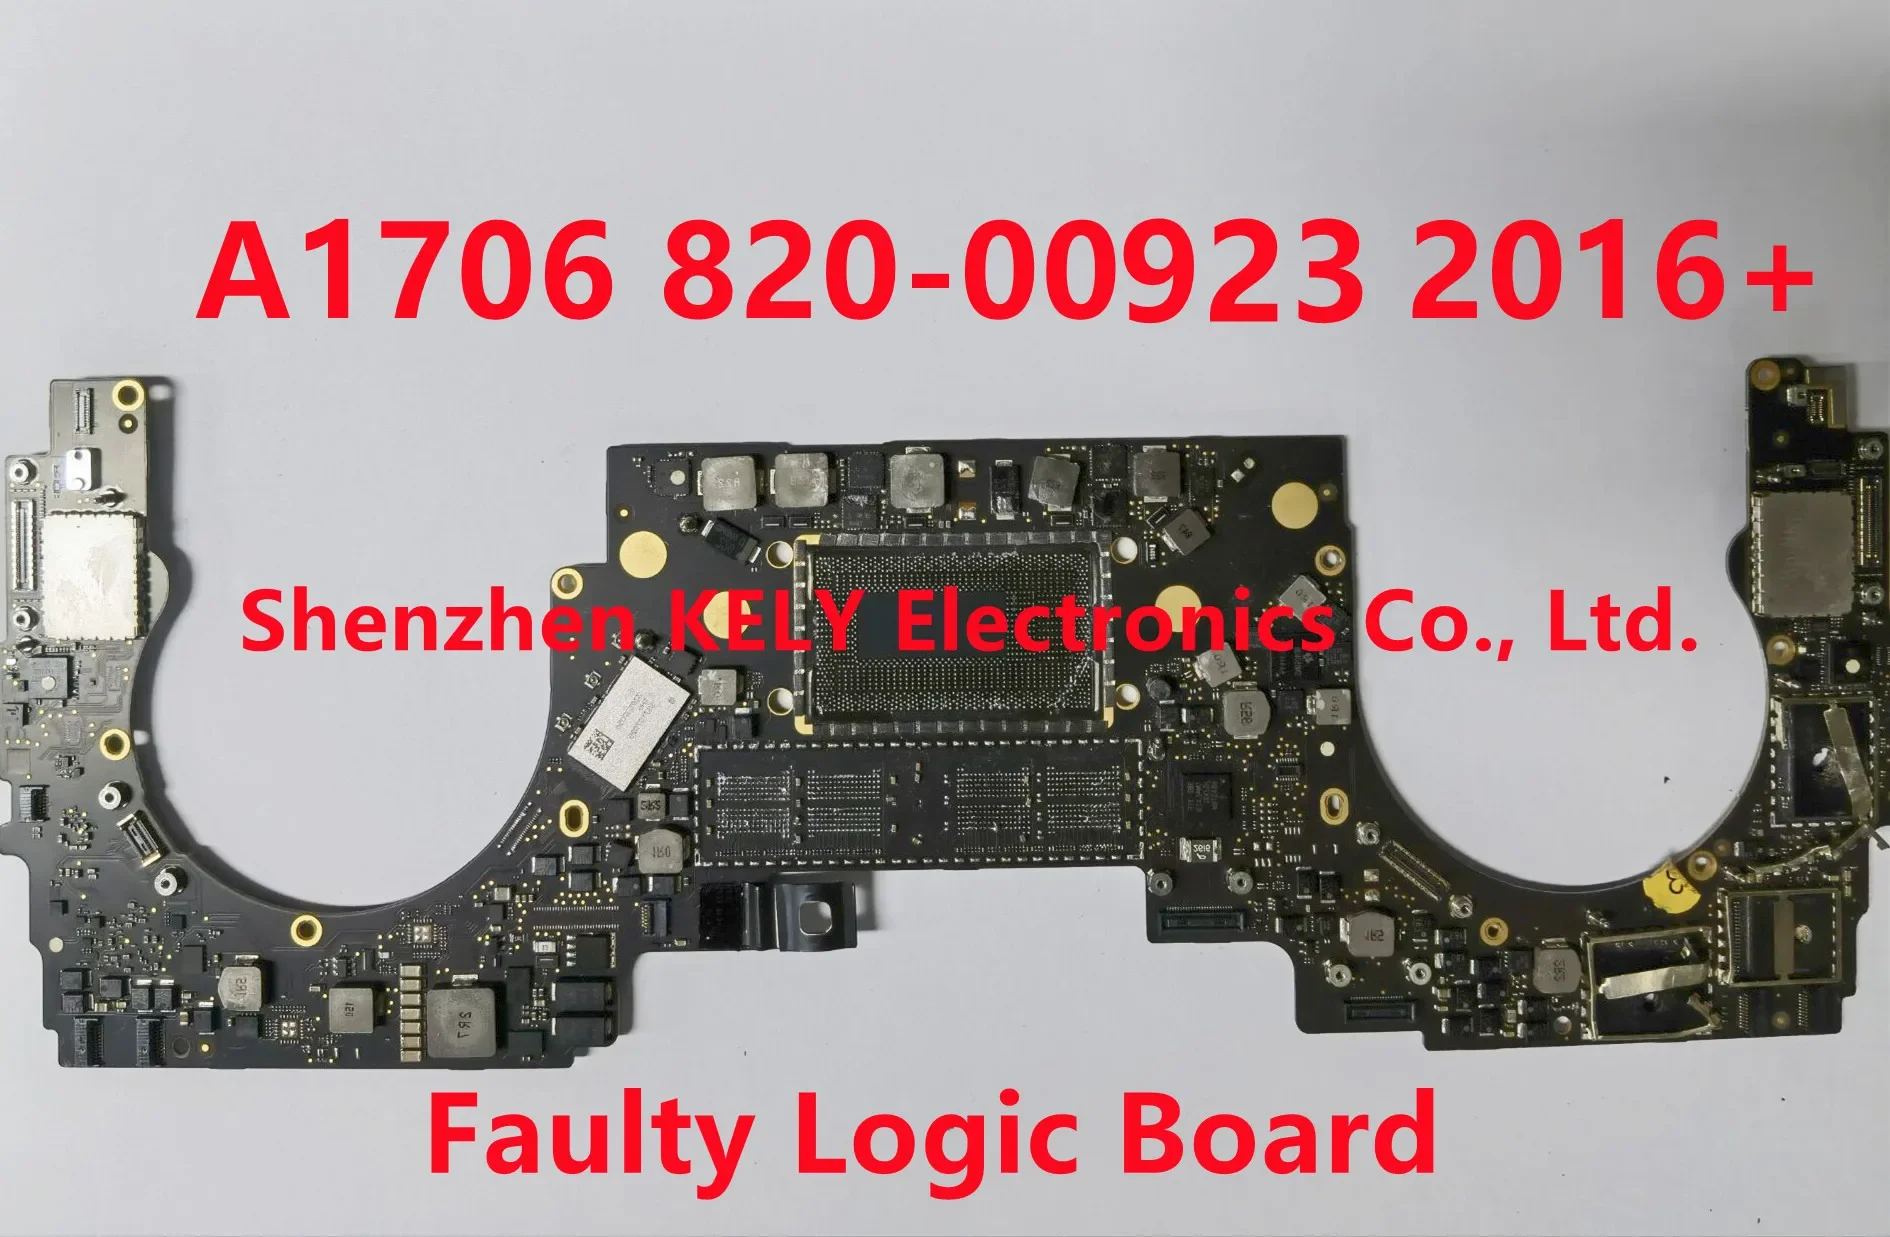 

2016 2017 years 820-00923 820-00923-A Faulty logic motherboard For A1706 MacBook Pro 13" repair